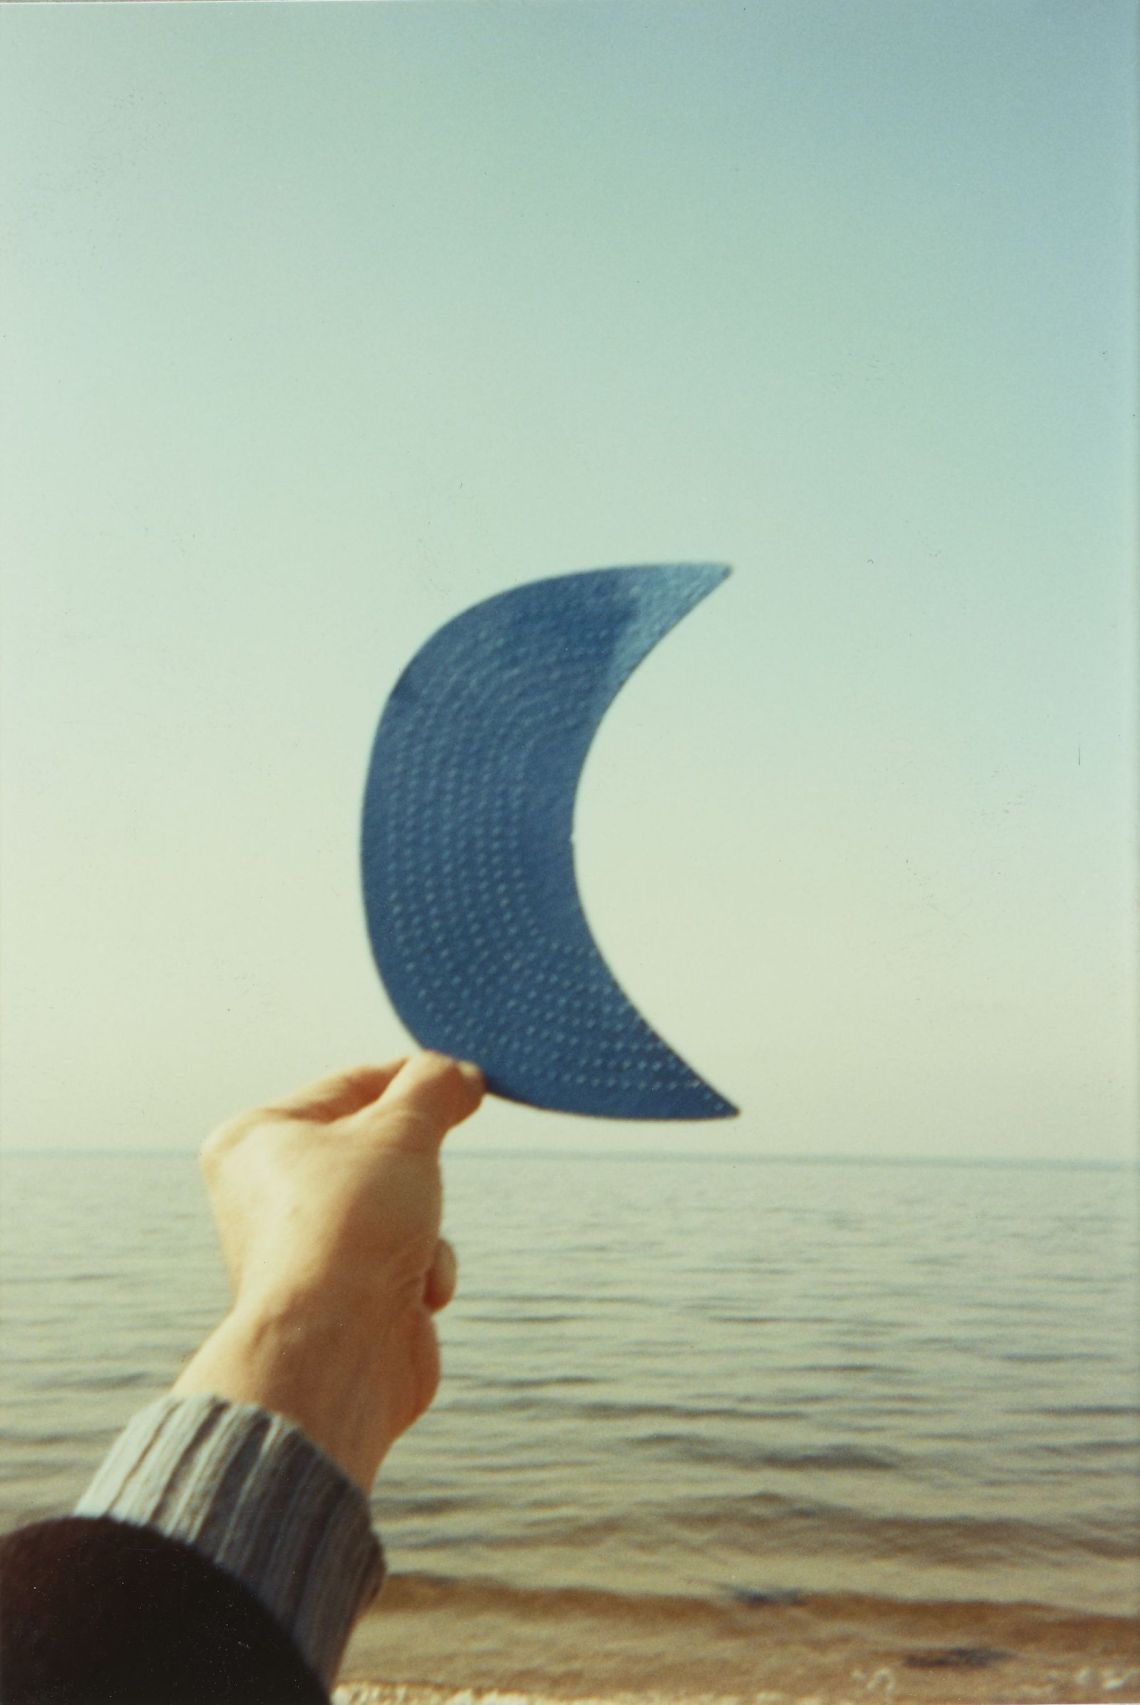 A hand holds a cutout of a crescent moon up to an ocean